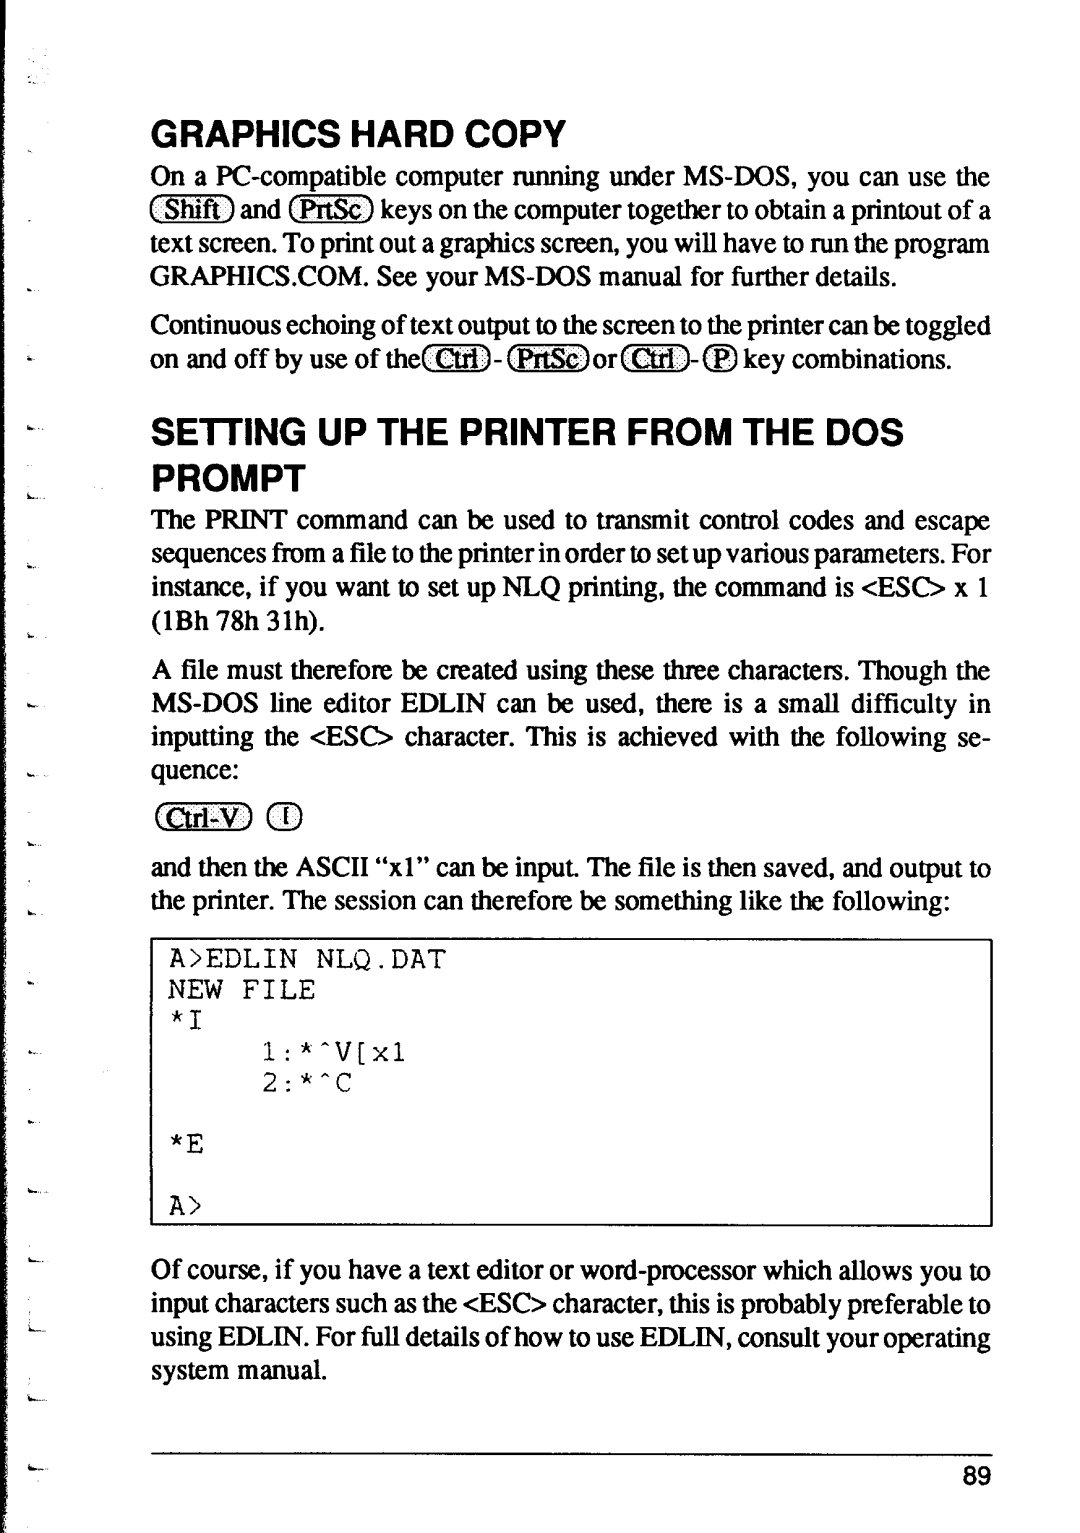 Star Micronics XR-1000, XR-1500 Graphics Hard Copy, Setting Up The Printer From The Dos Prompt, Aedlin Nlq.Dat New File 